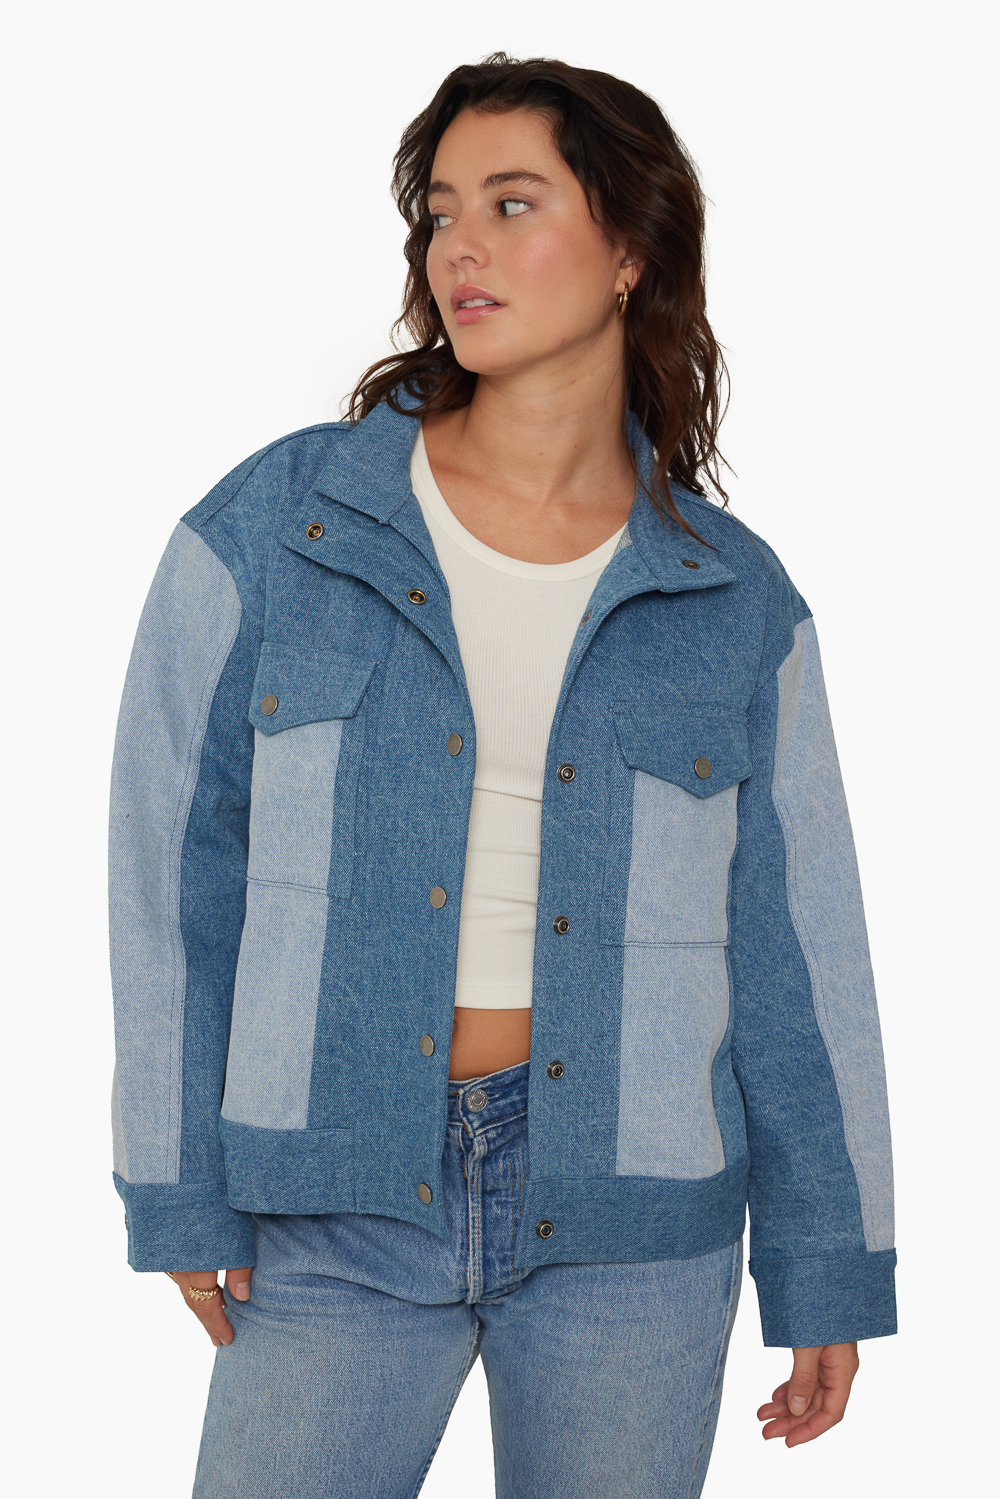 SET™ TWO TONED DENIM JACKET IN CLASSIC MID WASH